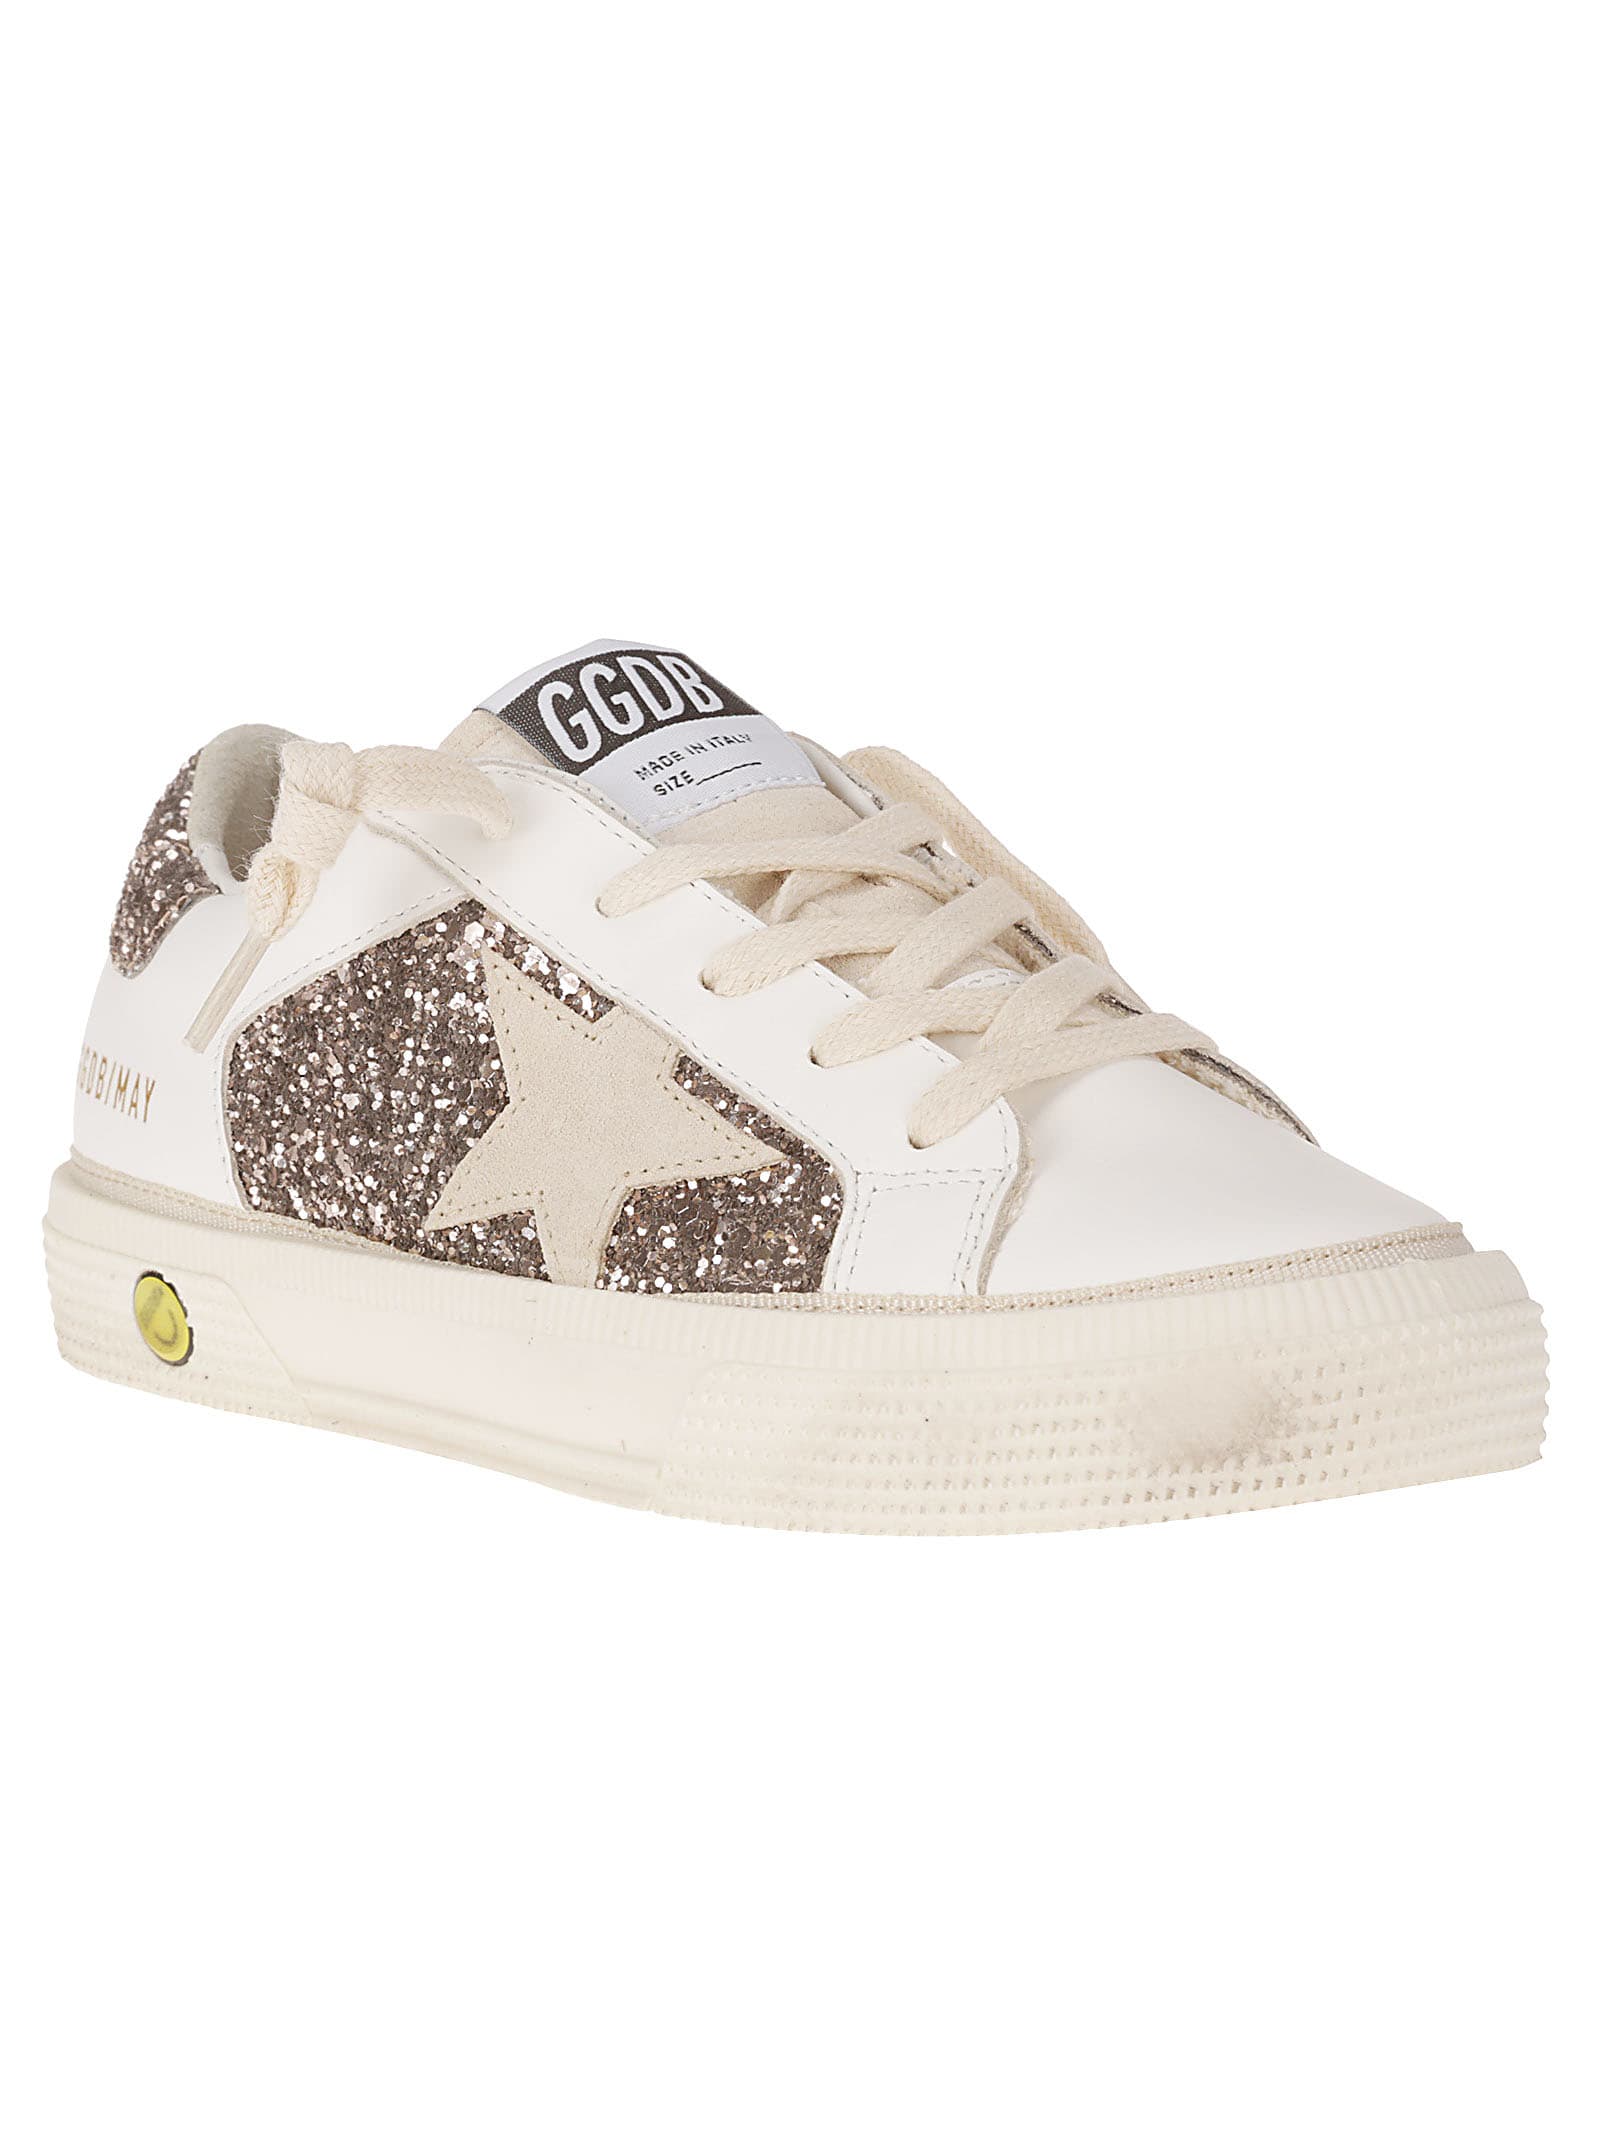 Shop Golden Goose May Leather And Glitter Upper Suede Star Glitte In Optic White/cinder/seed Pearl